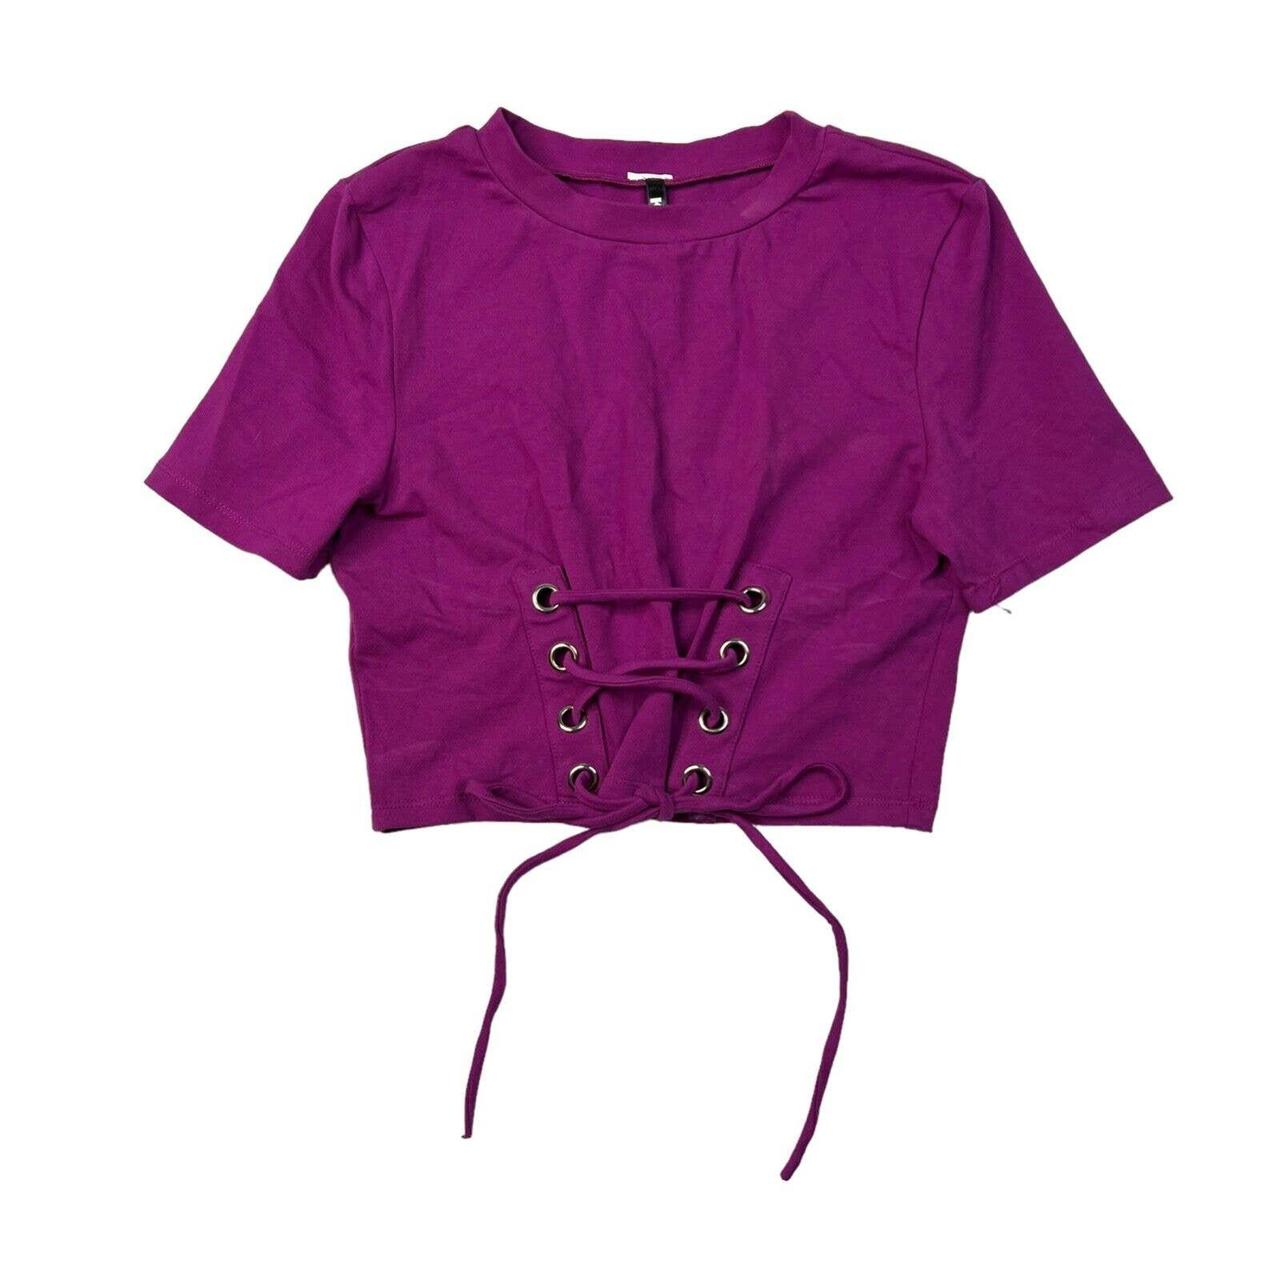 K Too Cropped Top Lace Up Short Sleeve Shirt Purple... - Depop